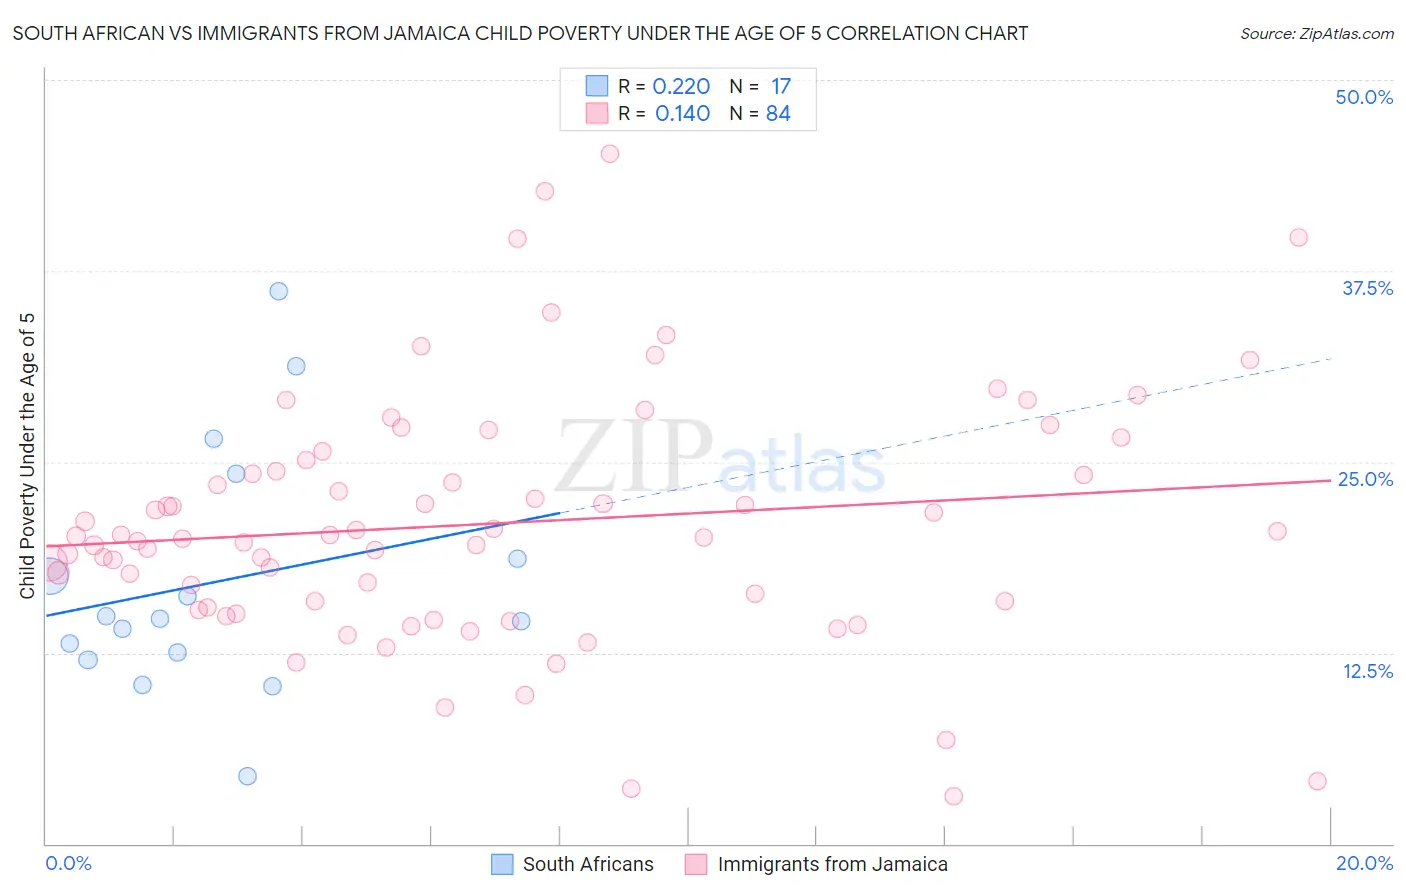 South African vs Immigrants from Jamaica Child Poverty Under the Age of 5